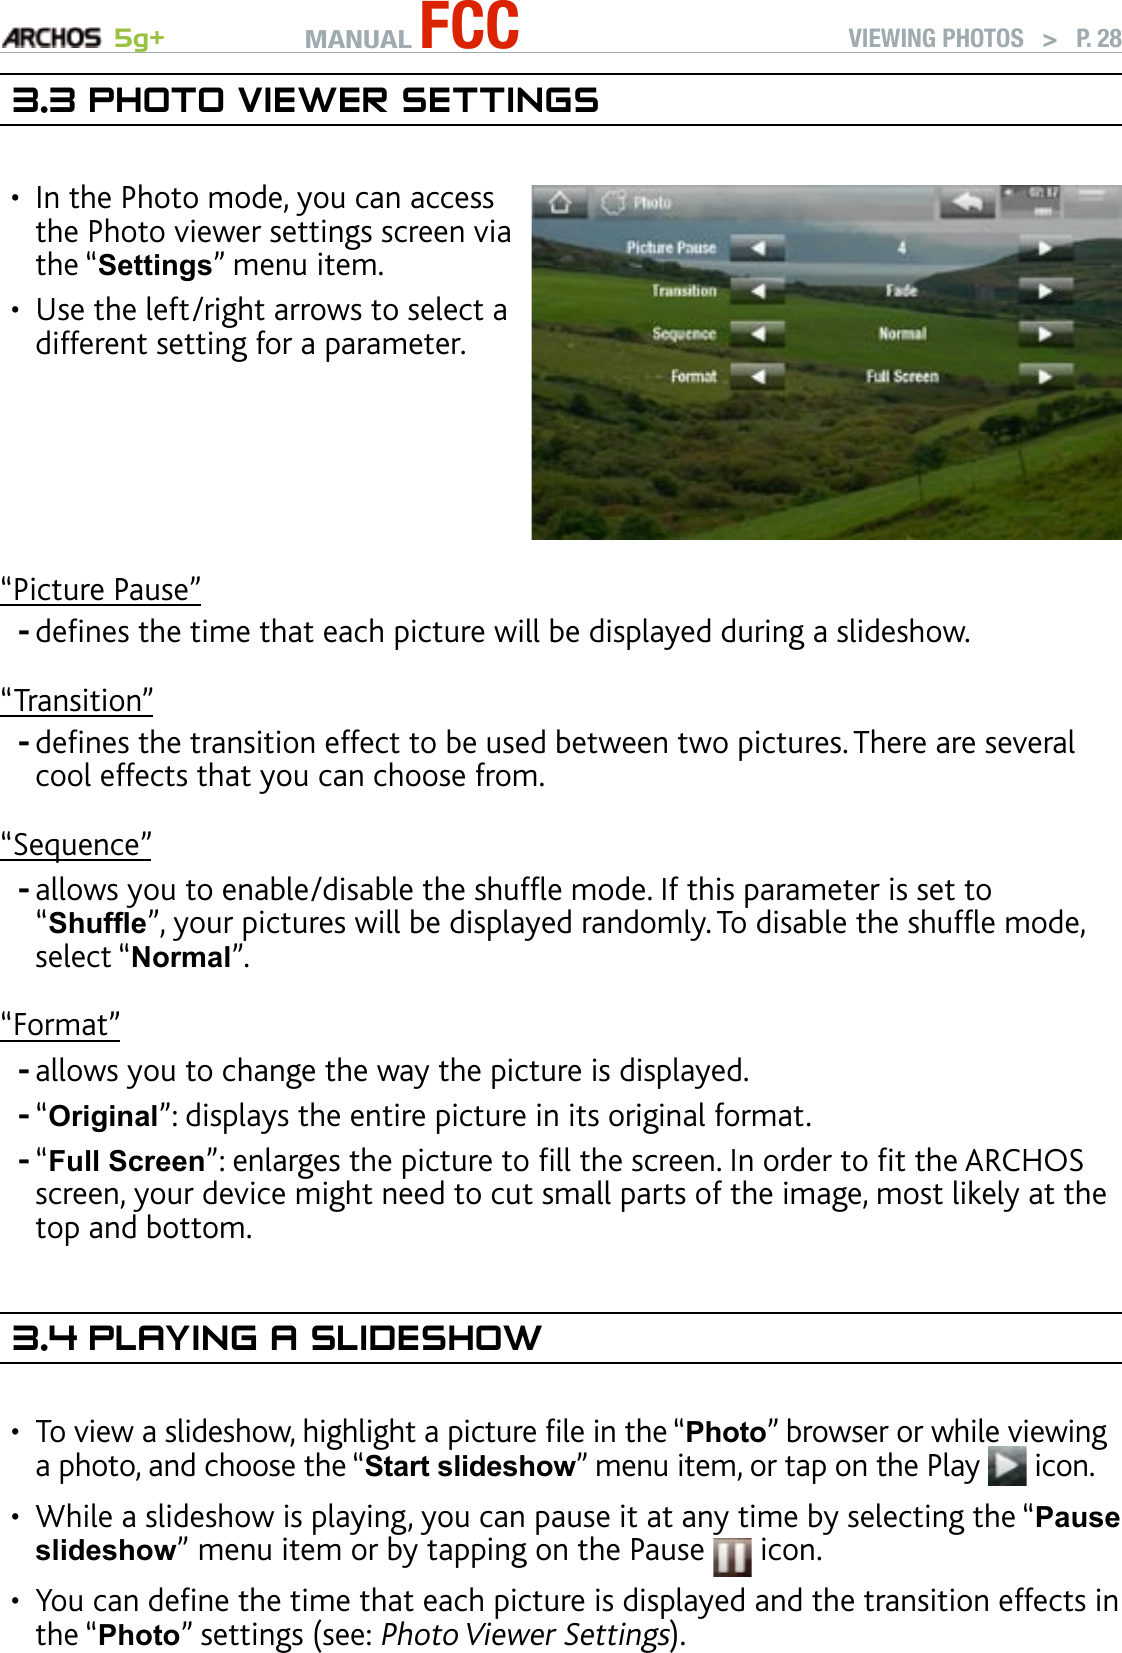 MANUAL FCC 5g+ VIEWING PHOTOS   &gt;   P. 283.3 PhOTO VIewer seTTIngsIn the Photo mode, you can access the Photo viewer settings screen via the “Settings” menu item. Use the left/right arrows to select a different setting for a parameter.••“Picture Pause”denes the time that each picture will be displayed during a slideshow.“Transition”denes the transition effect to be used between two pictures. There are several cool effects that you can choose from.“Sequence”allows you to enable/disable the shufe mode. If this parameter is set to “Shufe”, your pictures will be displayed randomly. To disable the shufe mode, select “Normal”. “Format”allows you to change the way the picture is displayed. “Original”: displays the entire picture in its original format.“Full Screen”: enlarges the picture to ll the screen. In order to t the ARCHOS screen, your device might need to cut small parts of the image, most likely at the top and bottom.3.4 PlayIng a slIdeshOwTo view a slideshow, highlight a picture le in the “Photo” browser or while viewing a photo, and choose the “Start slideshow” menu item, or tap on the Play   icon.While a slideshow is playing, you can pause it at any time by selecting the “Pause slideshow” menu item or by tapping on the Pause   icon.You can dene the time that each picture is displayed and the transition effects in the “Photo” settings (see: Photo Viewer Settings).------•••